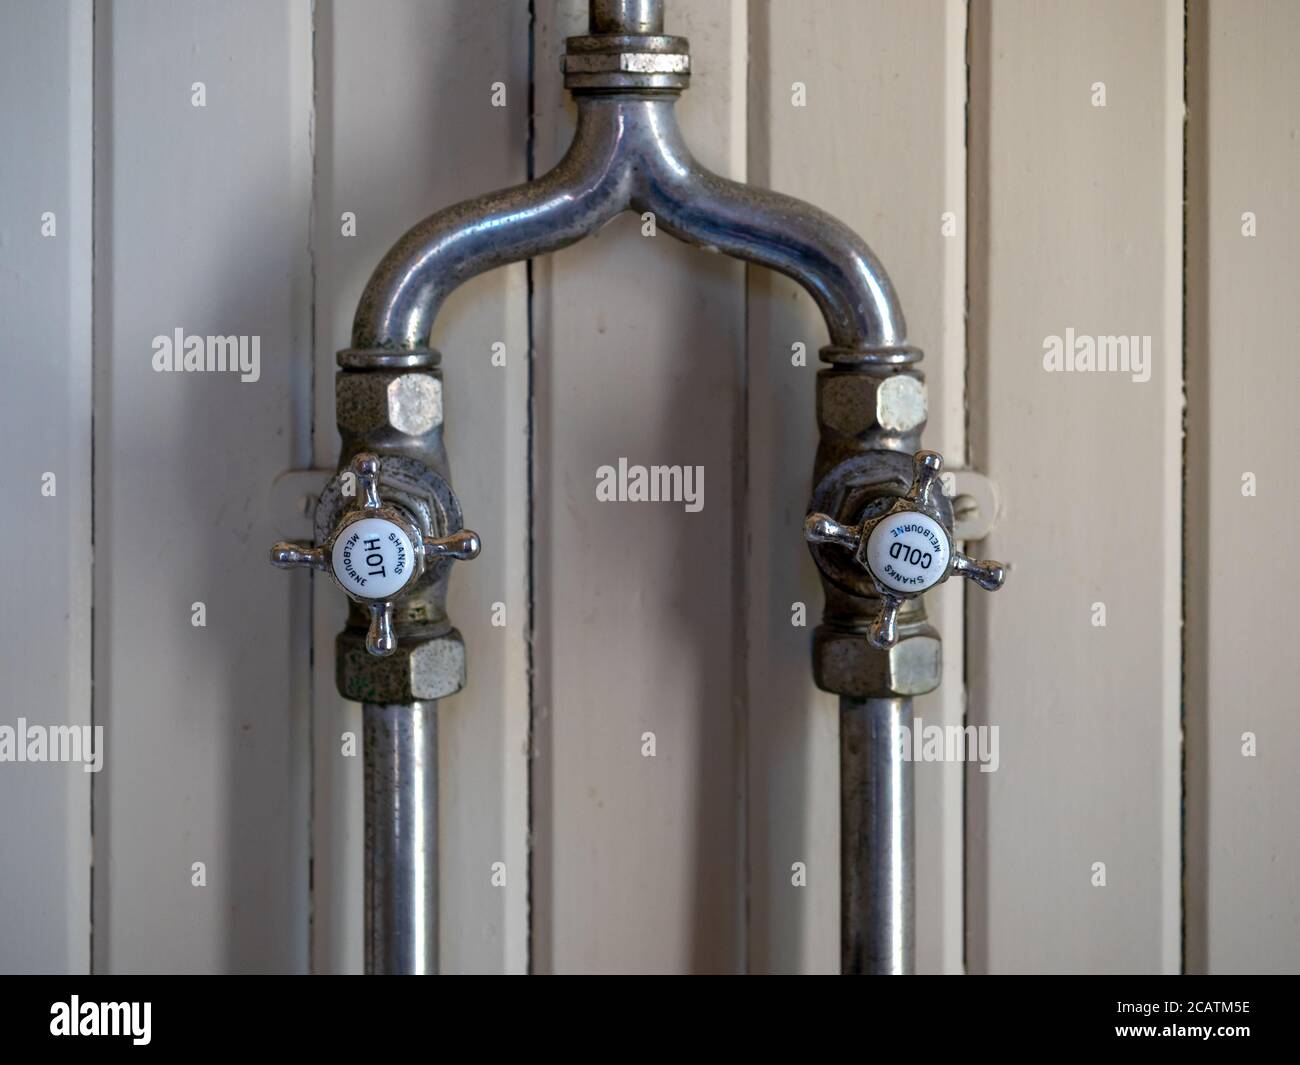 Vintage hot and cold water taps Stock Photo